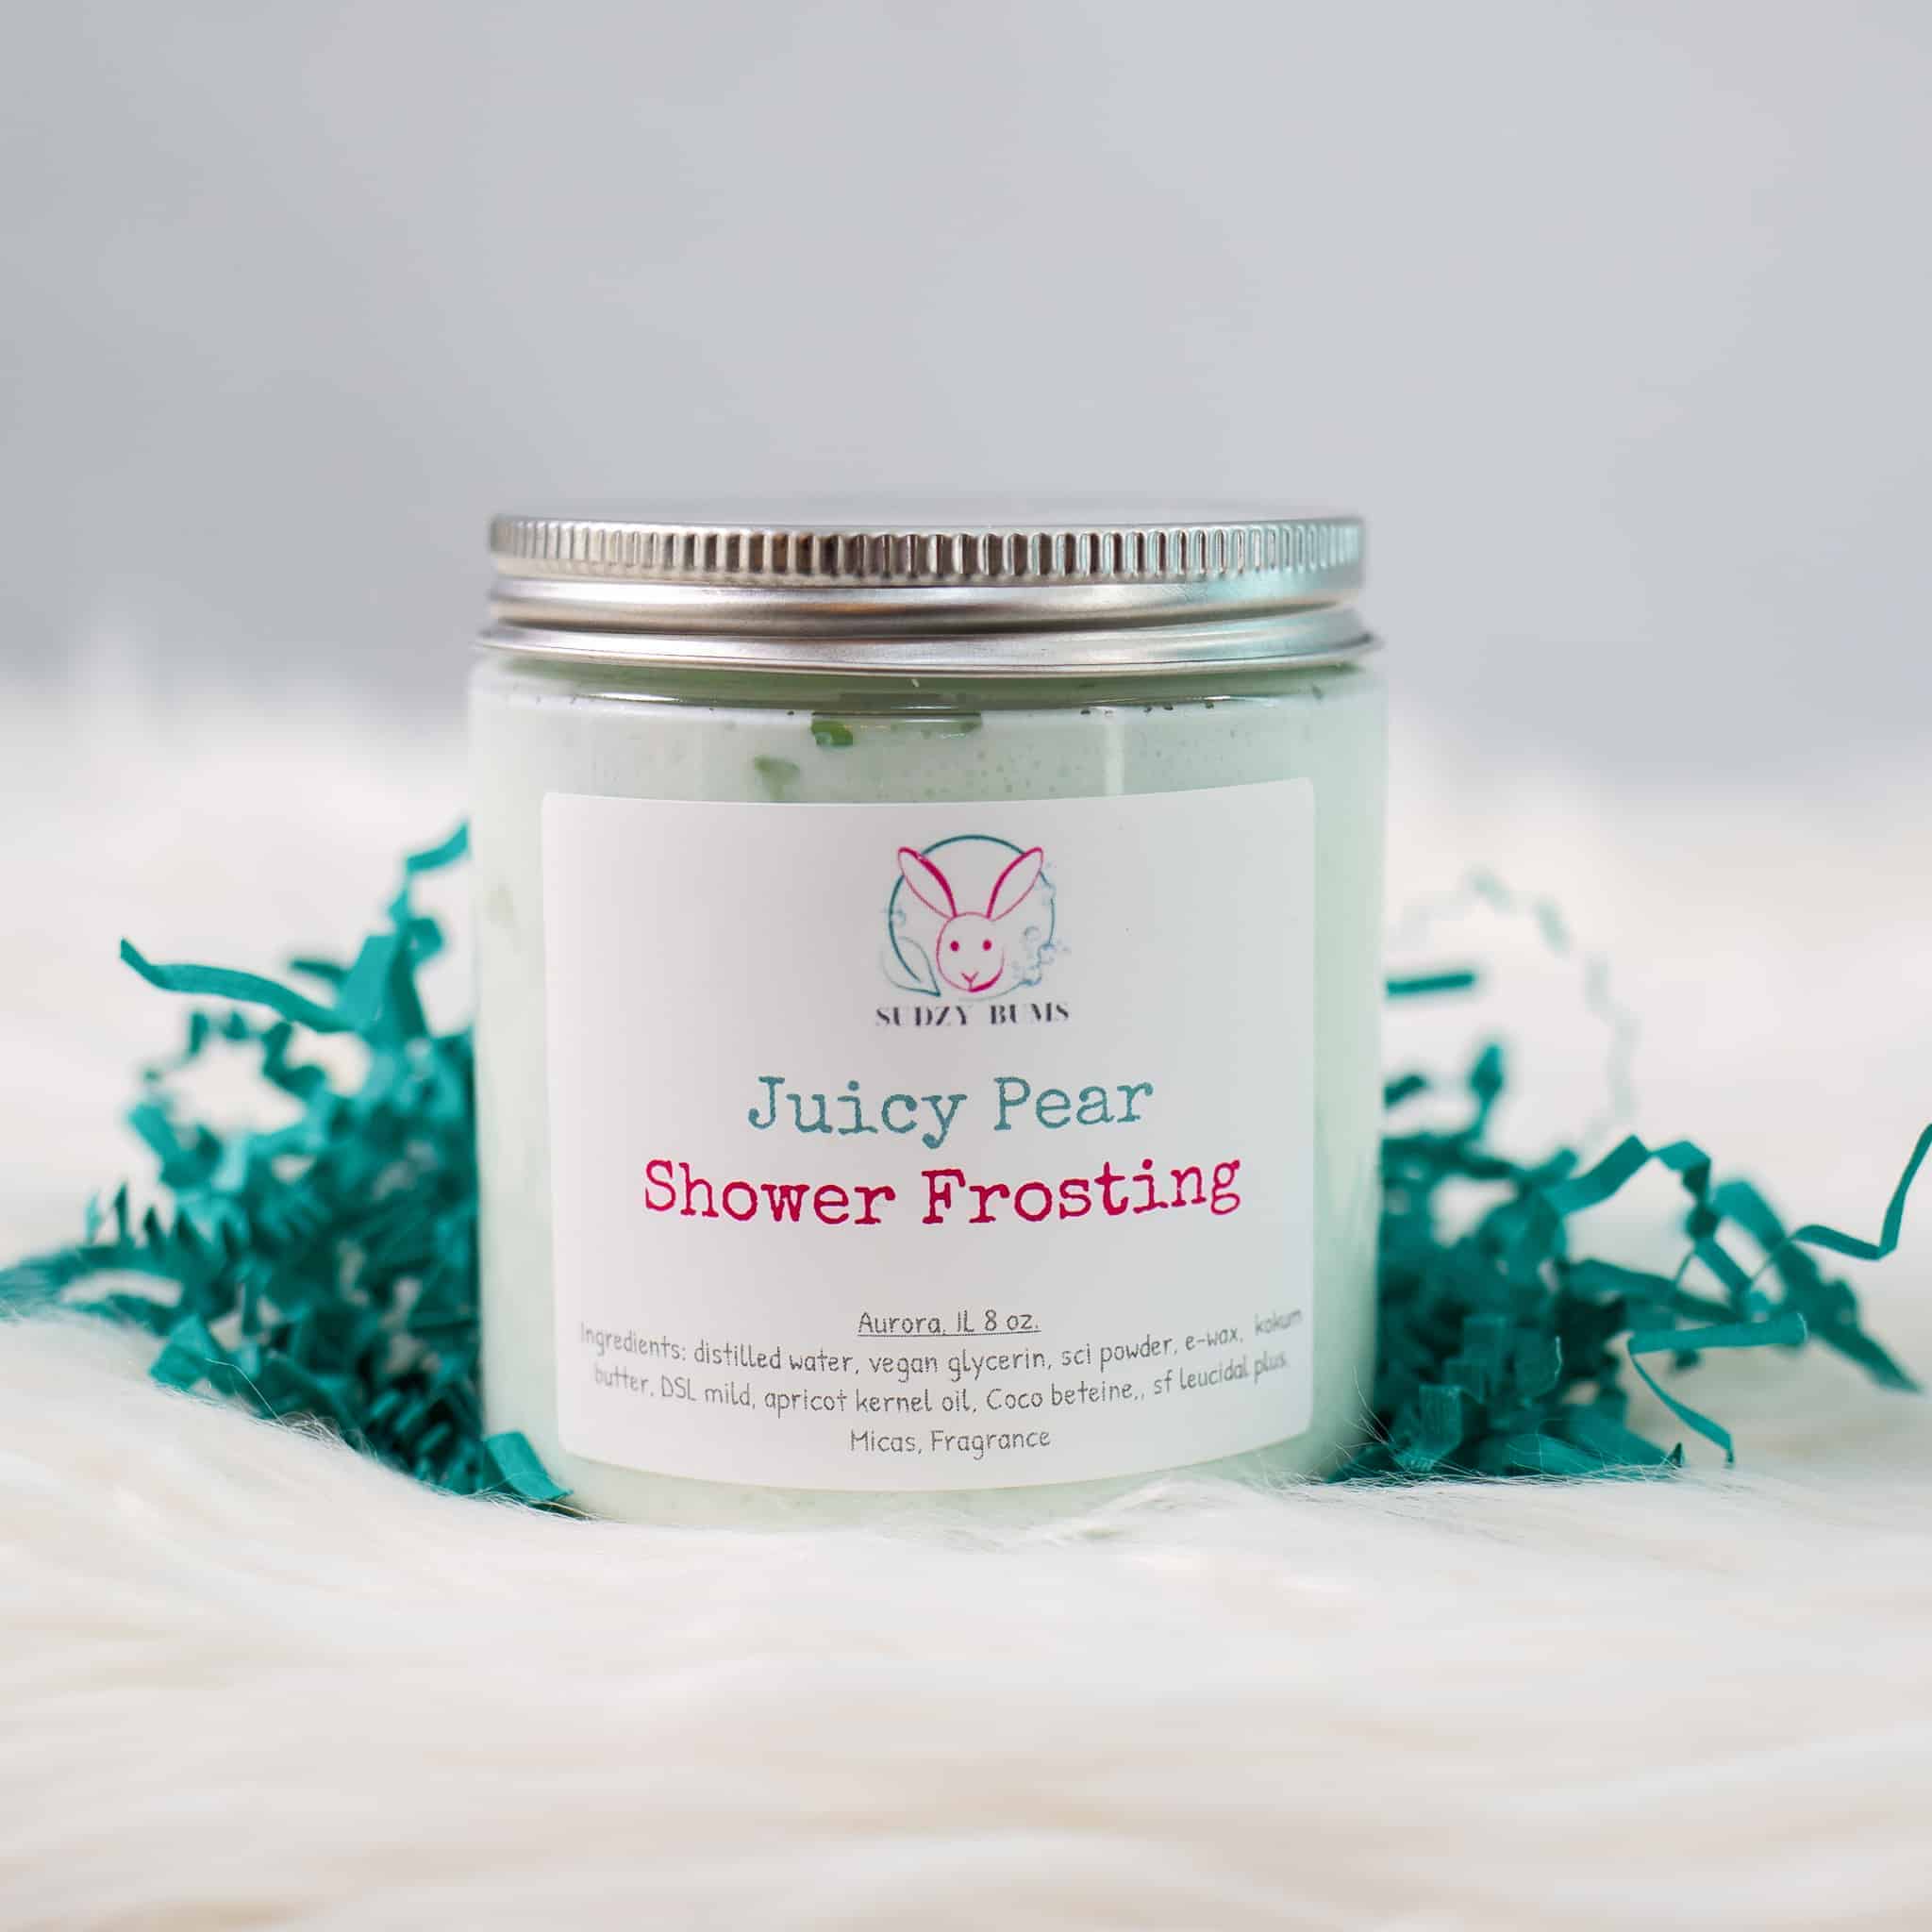 This Juicy Pear Vegan Shower Frosting is made with love by Sudzy Bums! Shop more unique gift ideas today with Spots Initiatives, the best way to support creators.